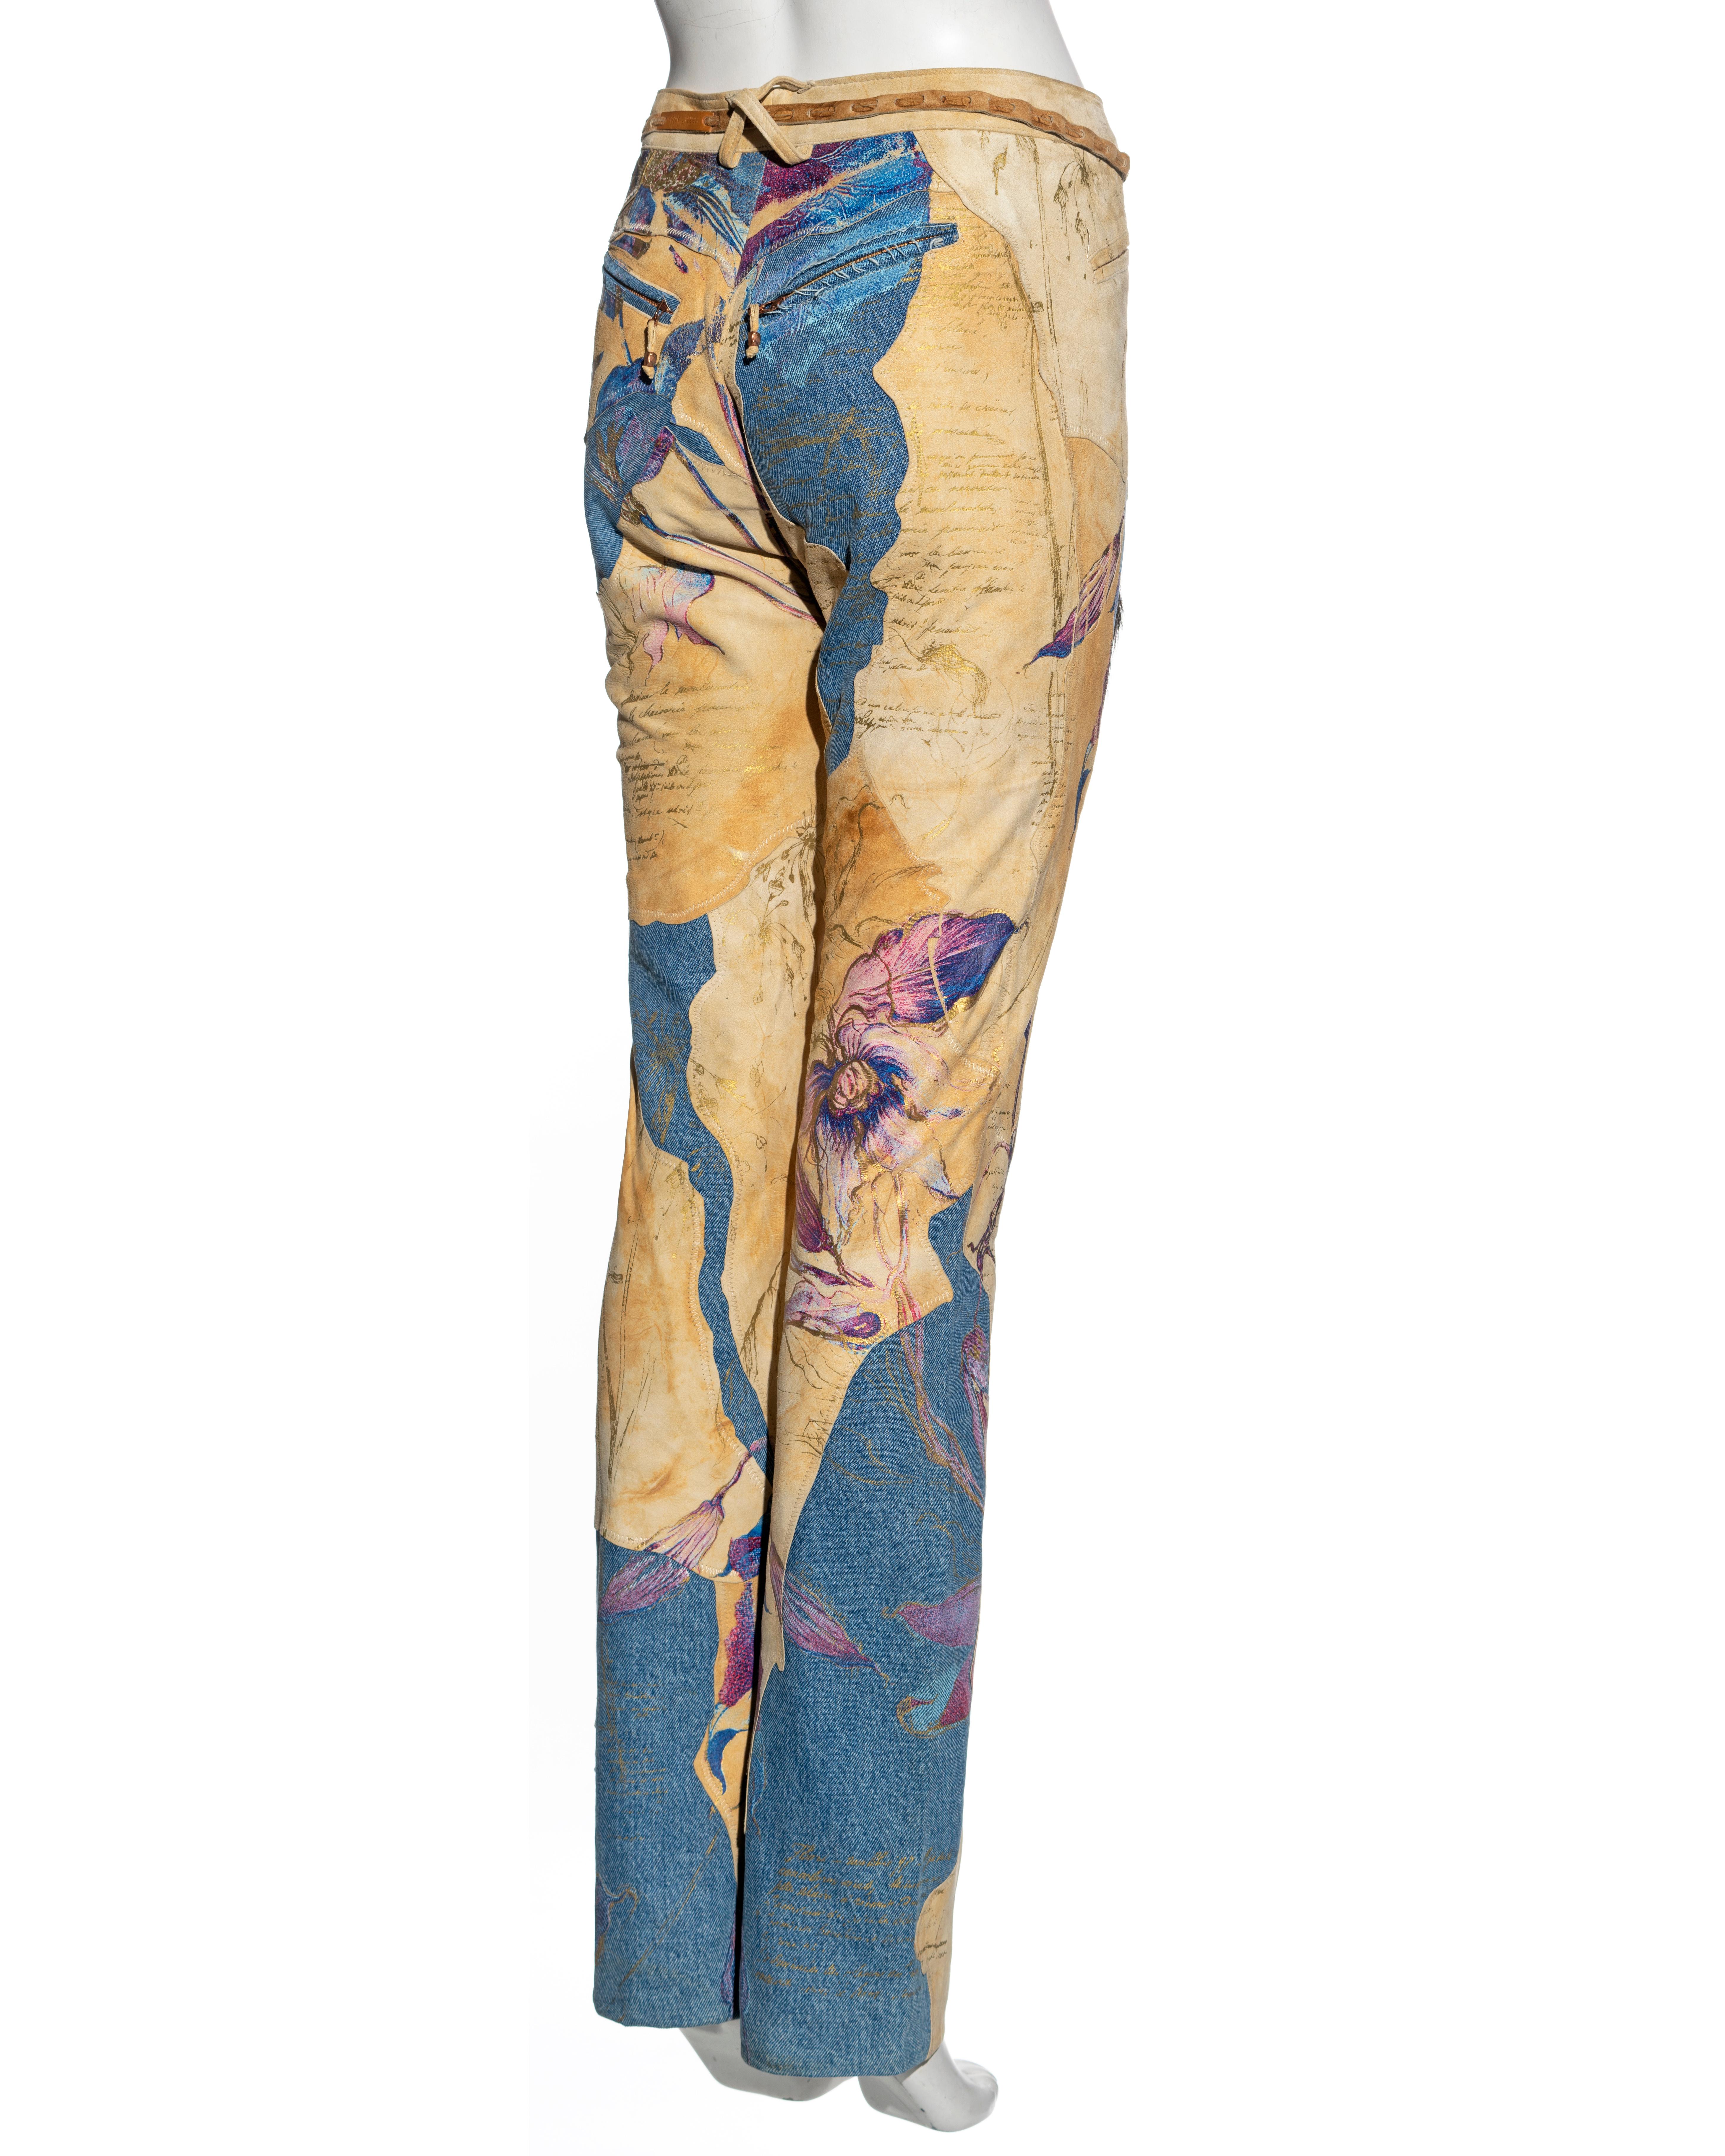 Roberto Cavalli leather and denim patchwork pants with gold foil print, fw 1999 3